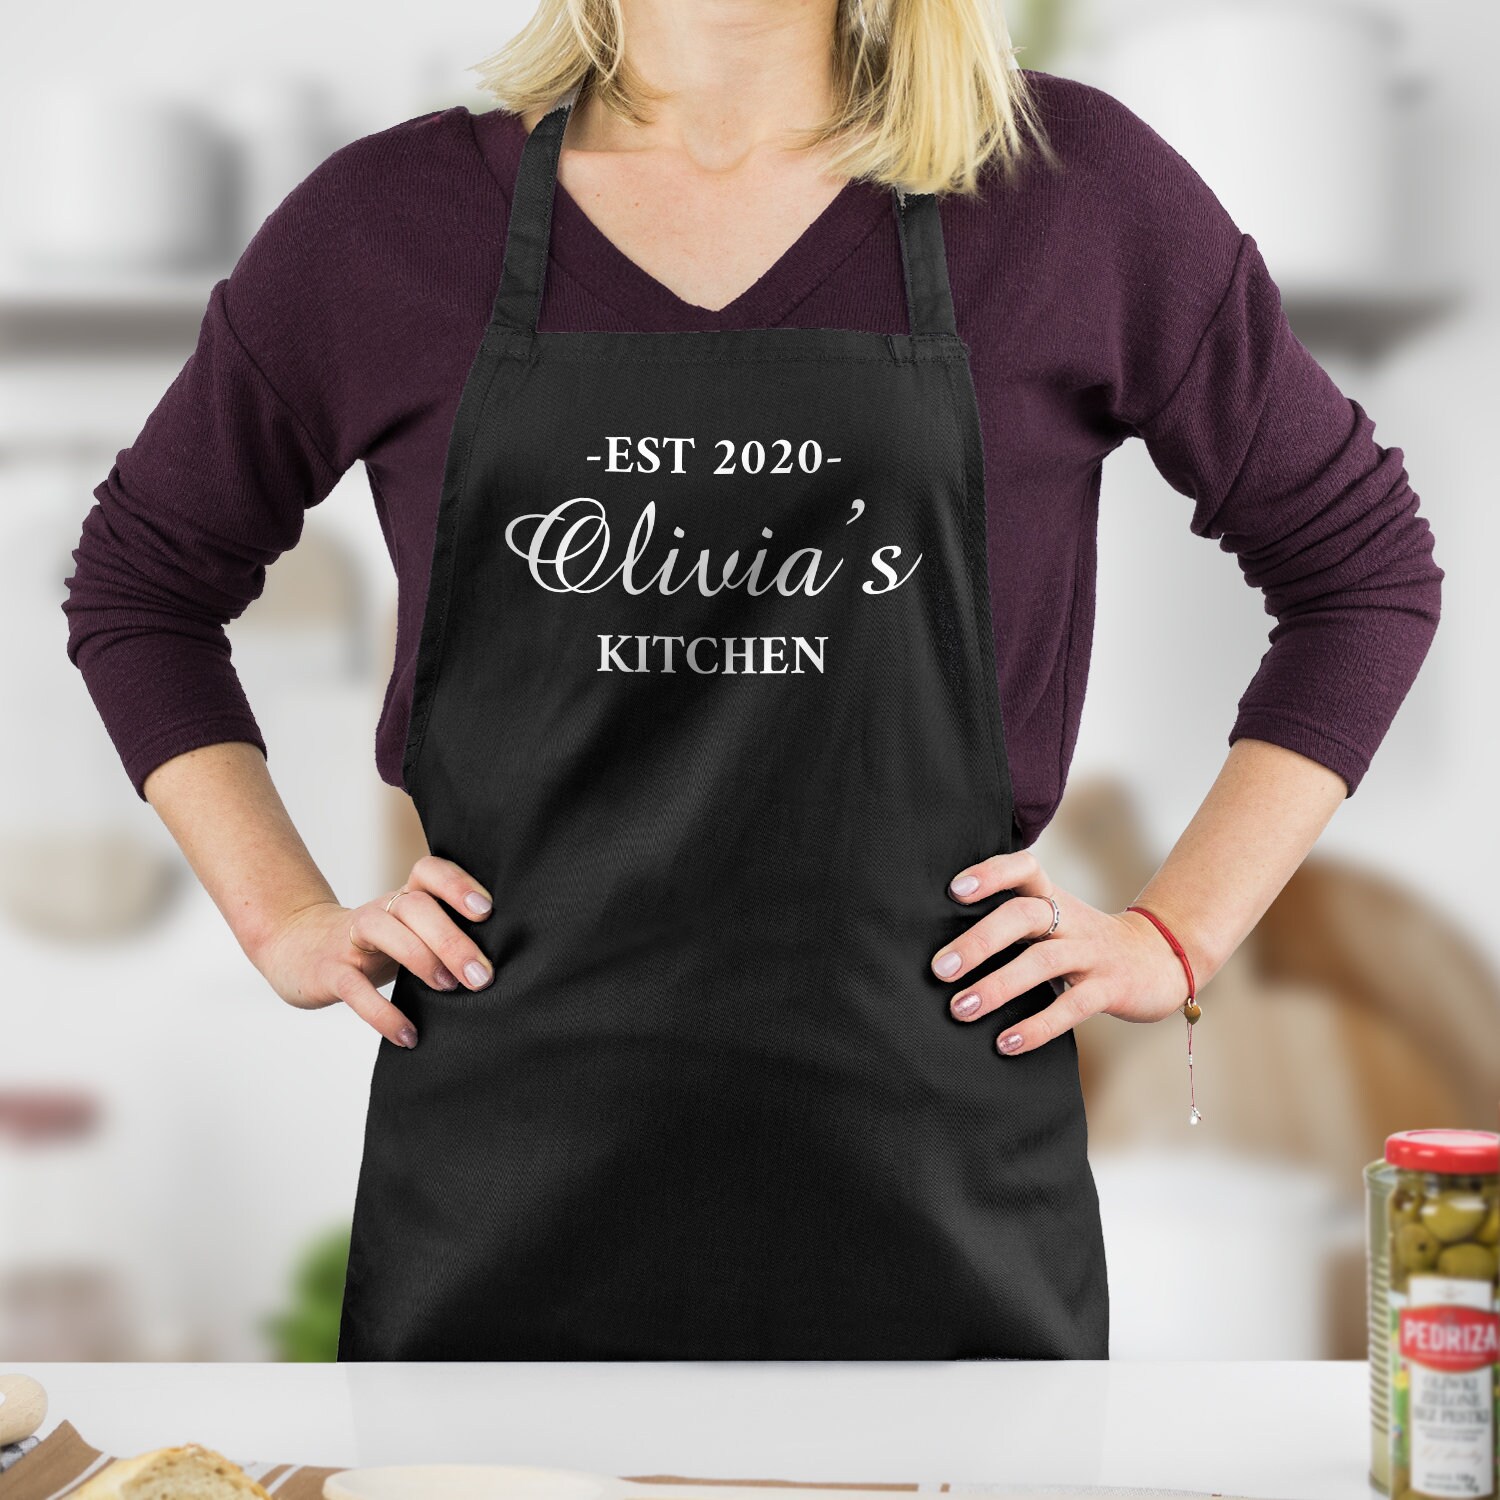  Mr. Mrs. Custom Name Apron, Personalized Couples Apron, High  Quality Cooking Apron, Customizable Kitchen Gift, Men and Women Matching  Gift, Gifts for Valentines Day, Mothers Day, Anniversary, Wedding :  Handmade Products